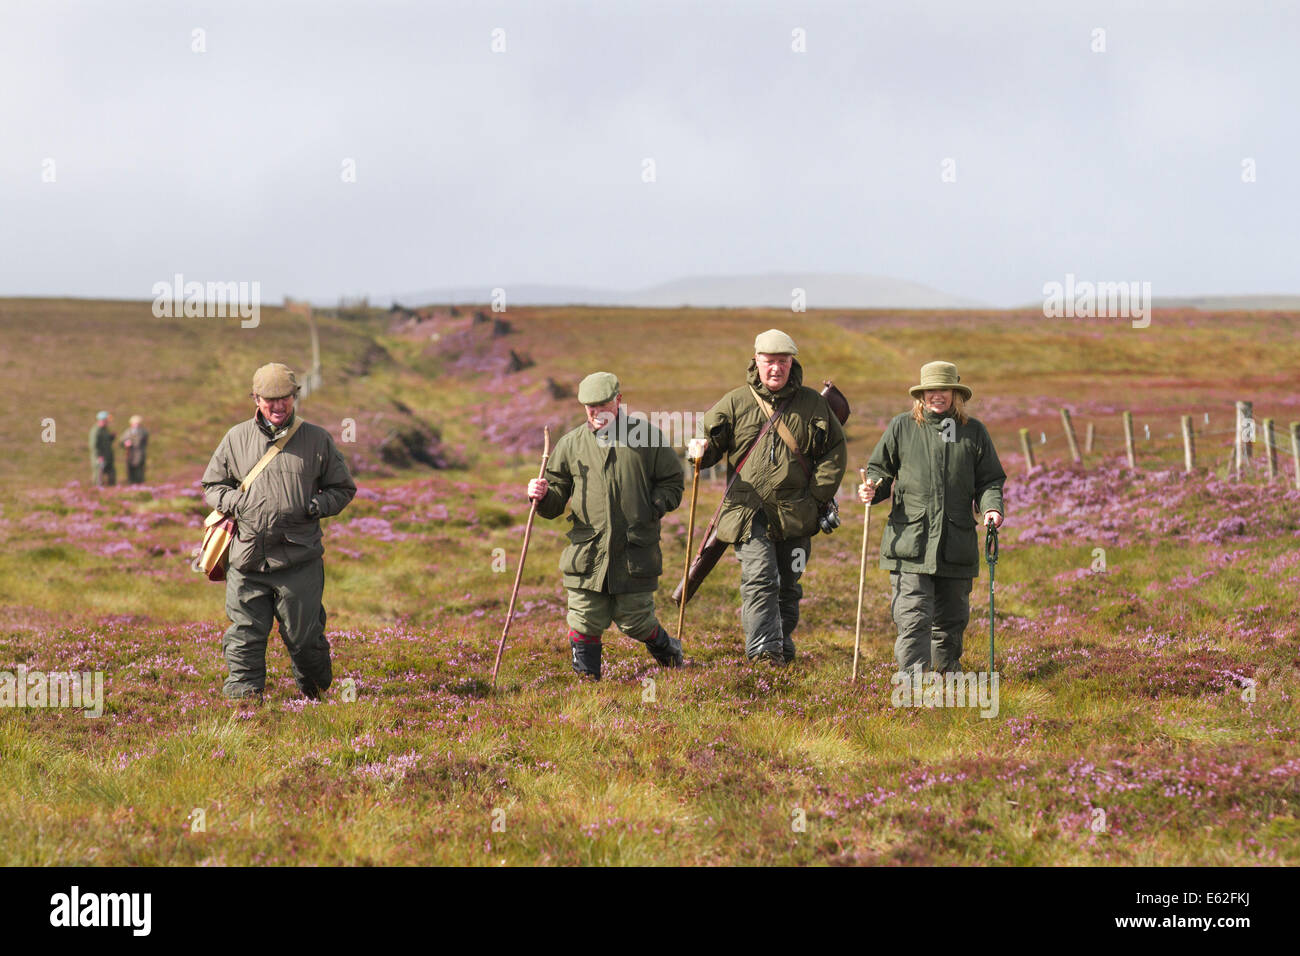 Grouse shooters crossing moorland in Coverdale, Yorkshire Dales, UK 12th August 2014.  Grouse Shooting on The Glorious Twelfth, the official opening of the British Game season, on the Coverdale grouse moors.  The date itself is traditional; the current legislation enshrining it is the Game Act 1831. The red grouse is the fastest bird on earth and manages a staggering 80 mph in just a few beats of the wing, and is unique to Great Britain and lives out on the heather moorlands of Northern England and Scotland and on the North Yorkshire Moors alone. Stock Photo